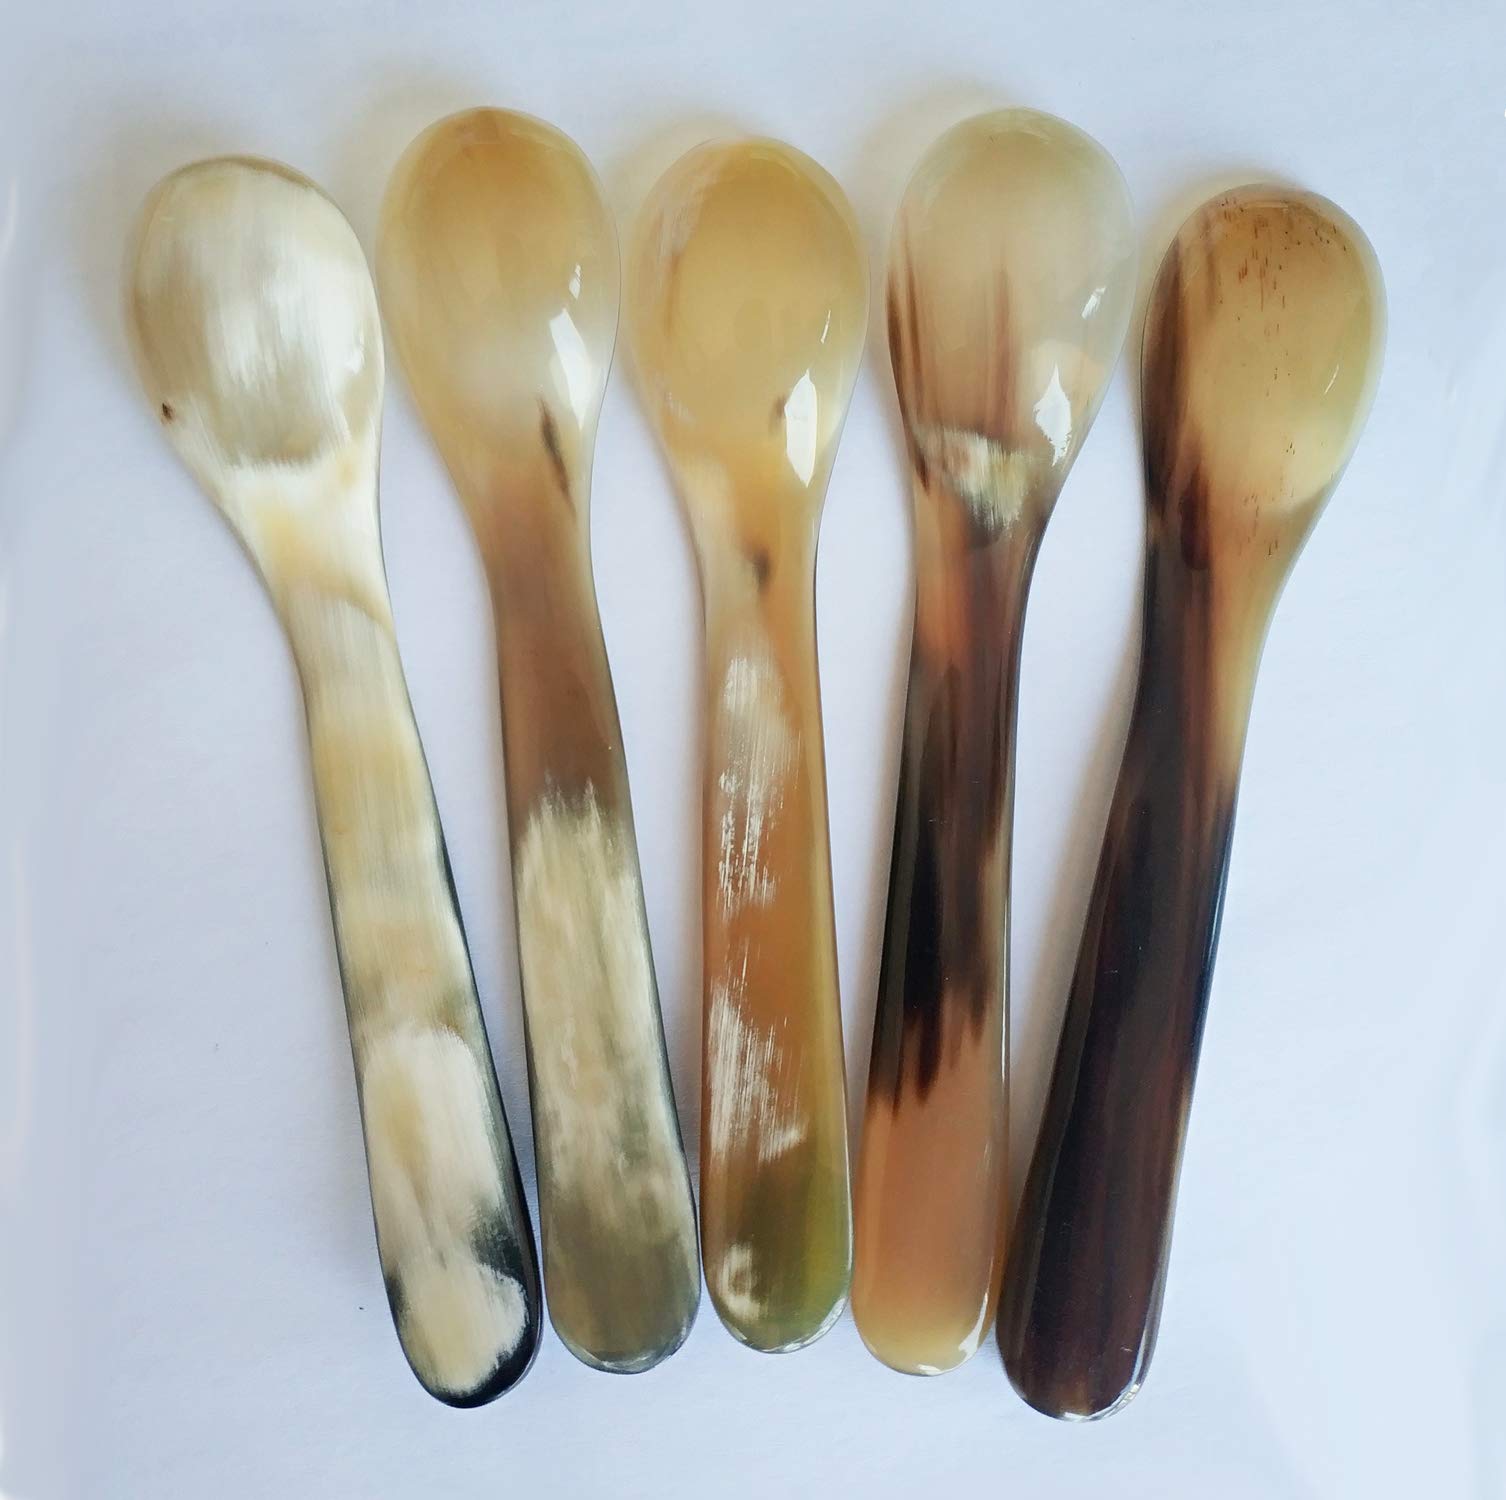 DUEBEL Set of 5 Naturally Handcrafted Buffalo Horn Spoons, 5.6" x 1.1" Dinner Ware Serving Spoon (Light Color)